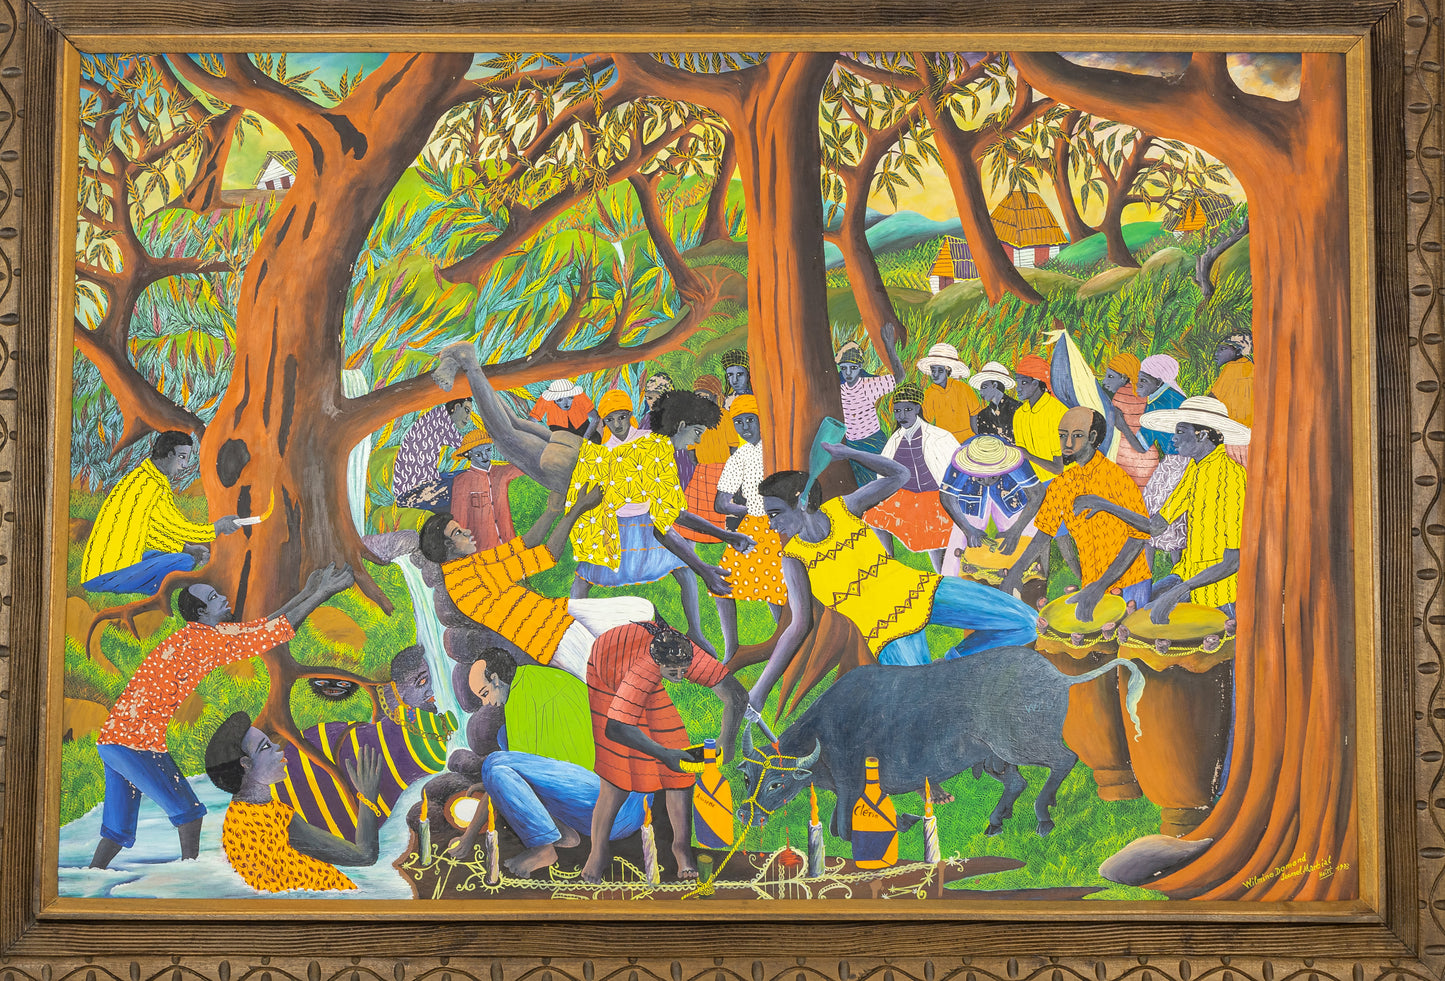 Wilmino Domond (1925-2006) 32"x47.25" Bois Caiman Voodoo Ceremony 1973 Oil on Board Framed Painting #19SS